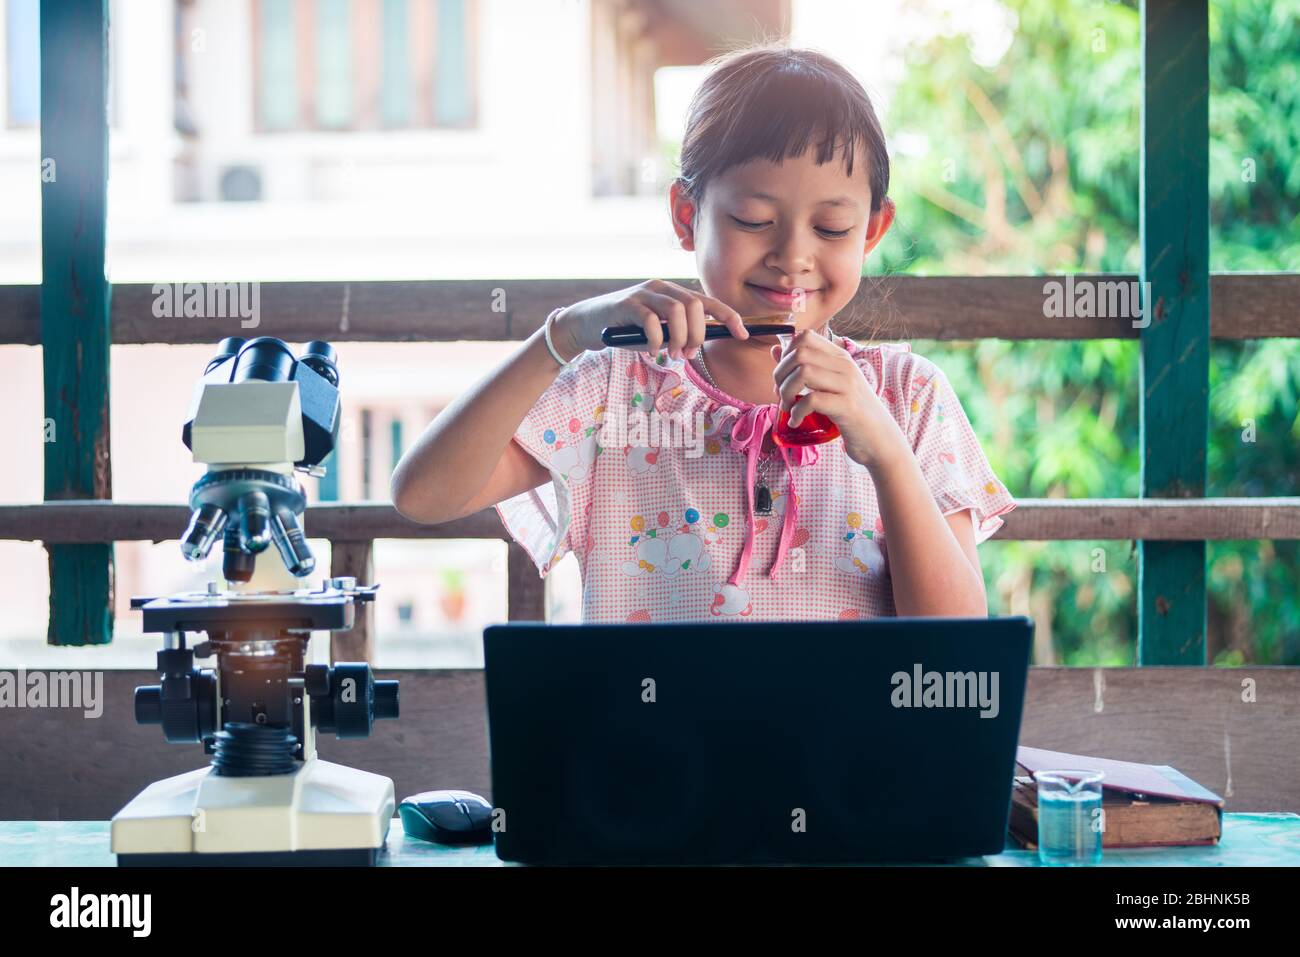 Smile little child girl learning and making science experiments. Home School Education concept. Stock Photo